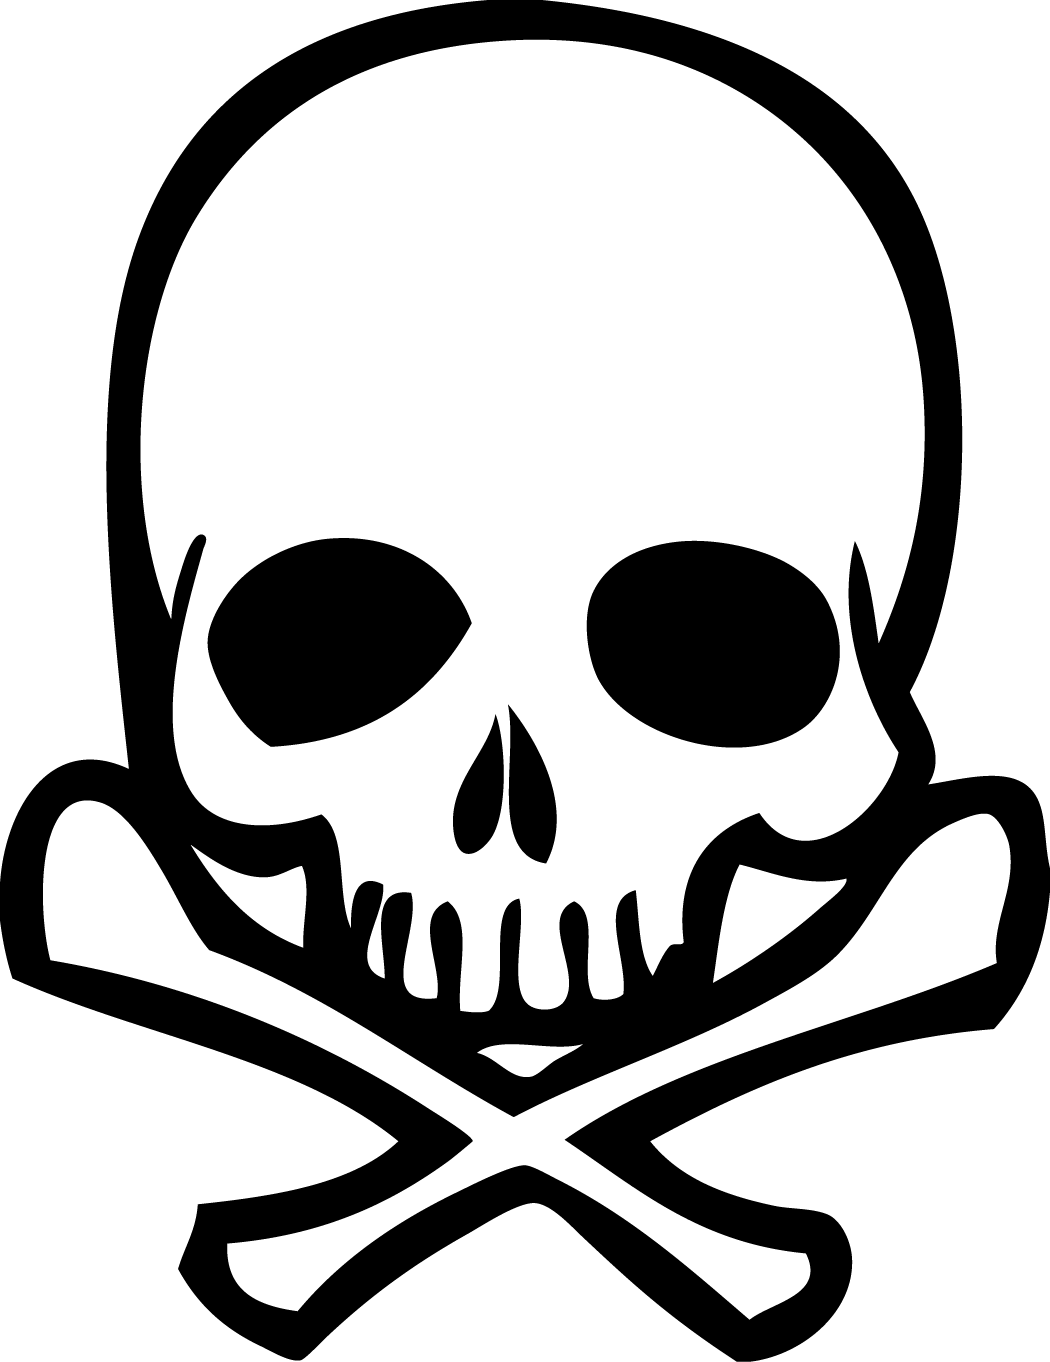 Skull And Crossbones Drawing - Clipart library